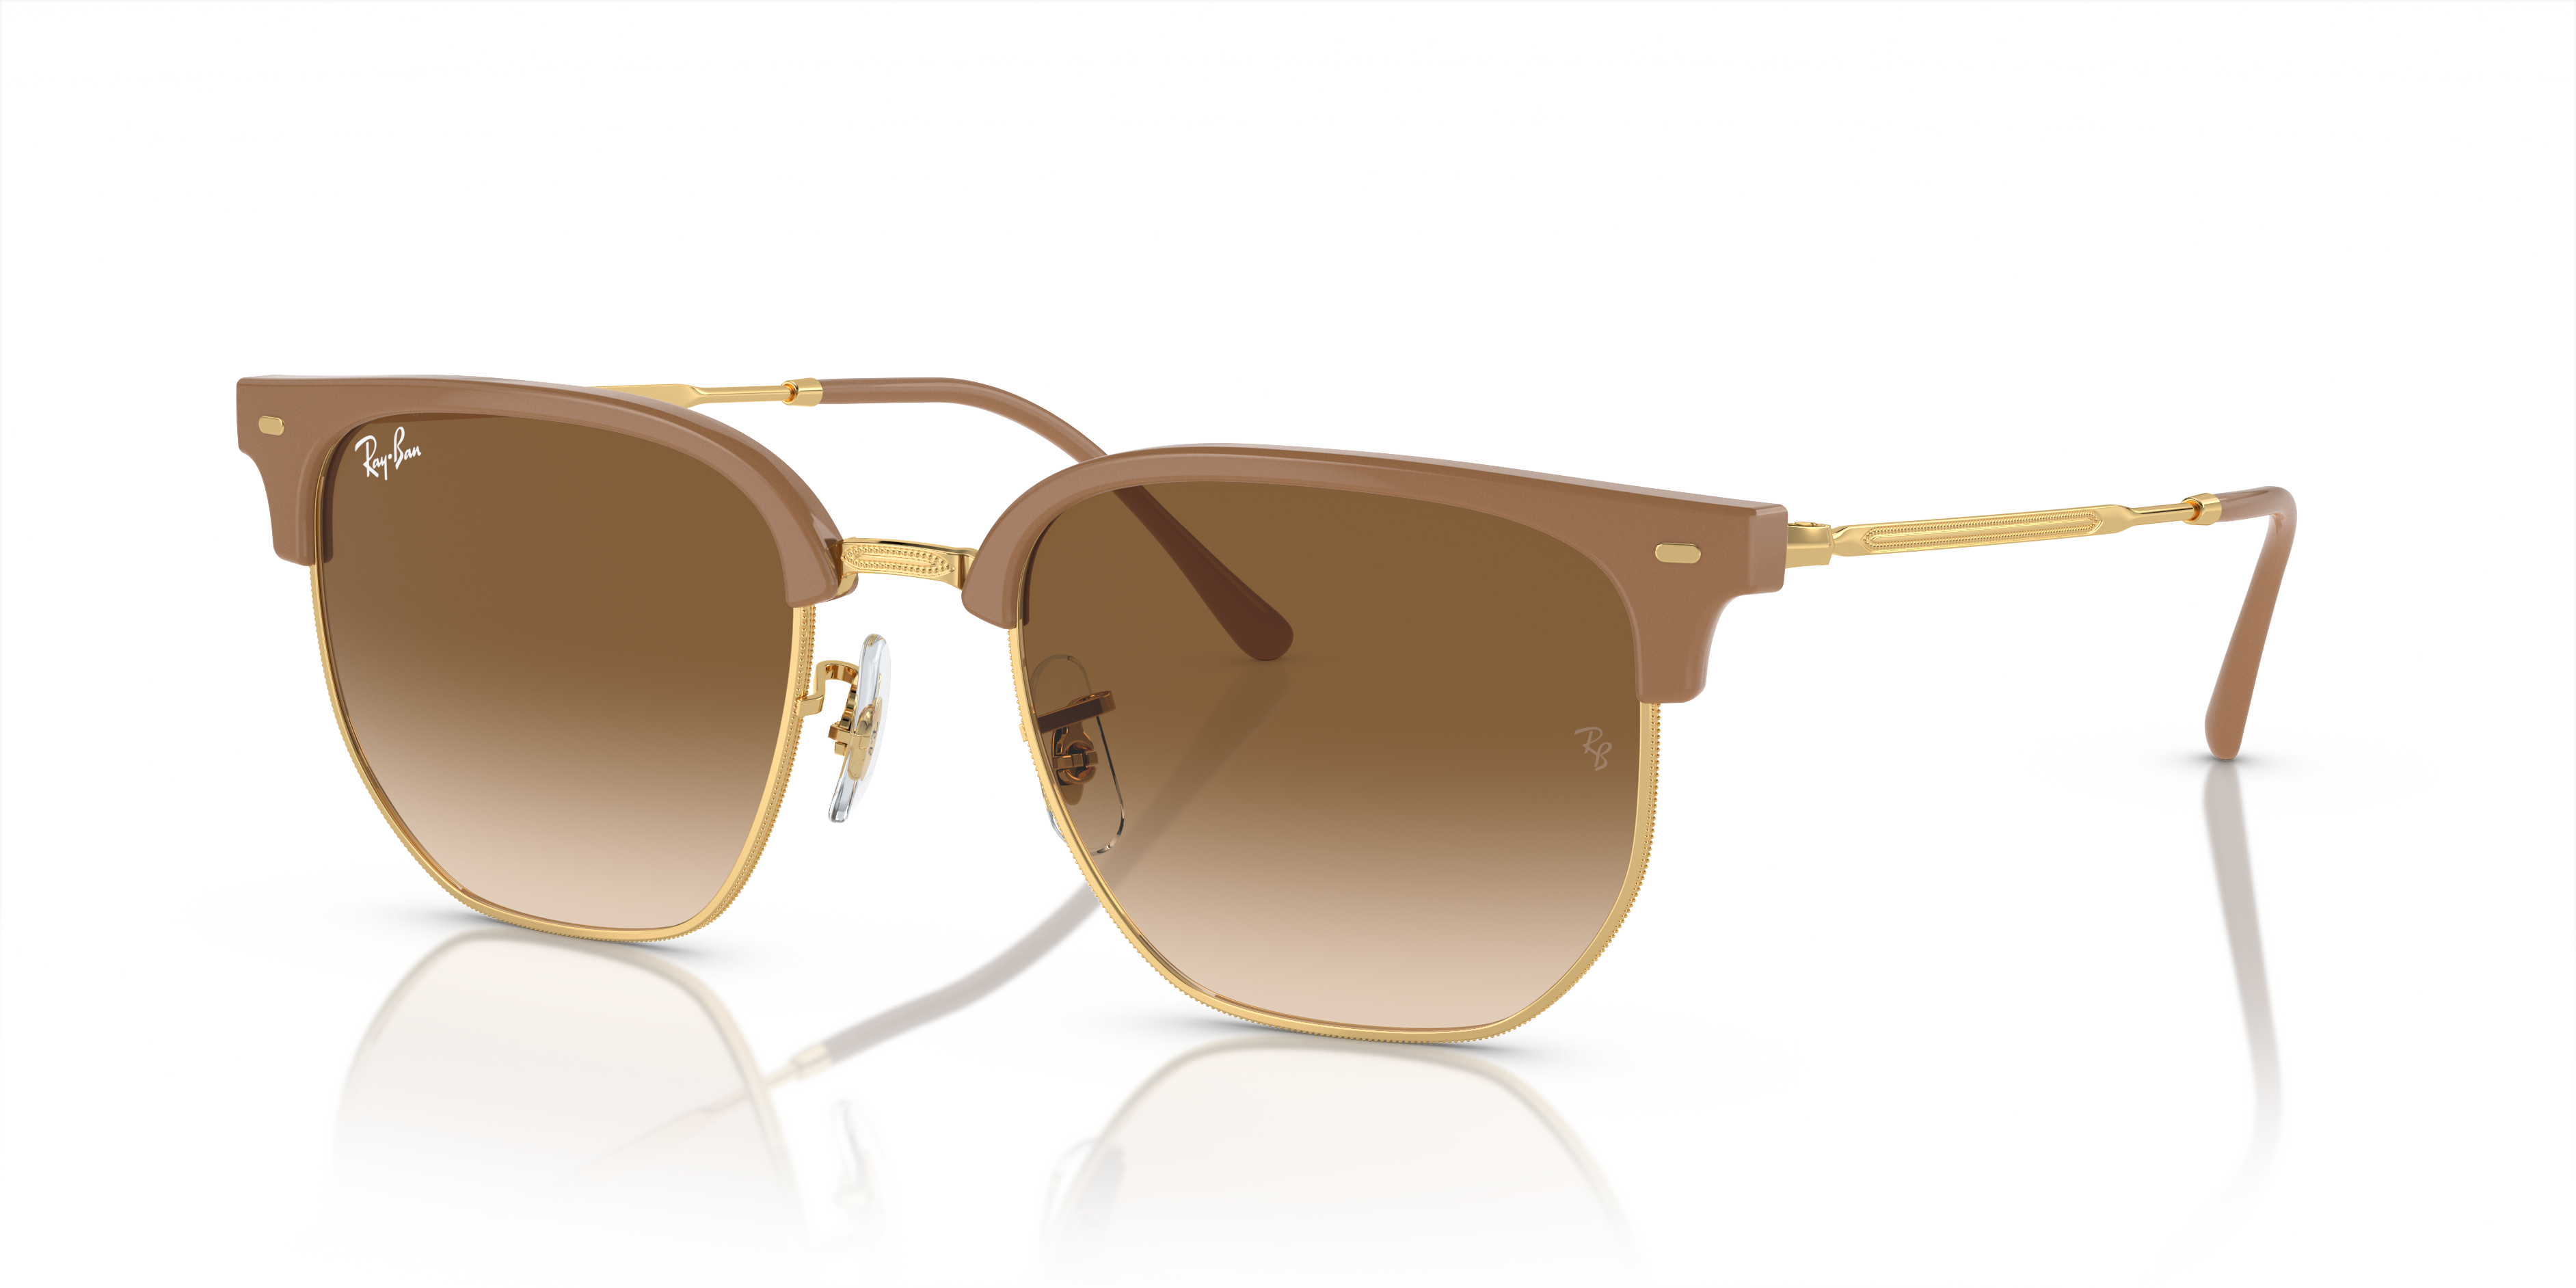 Ray Ban RB4416 672151 New Clubmaster 